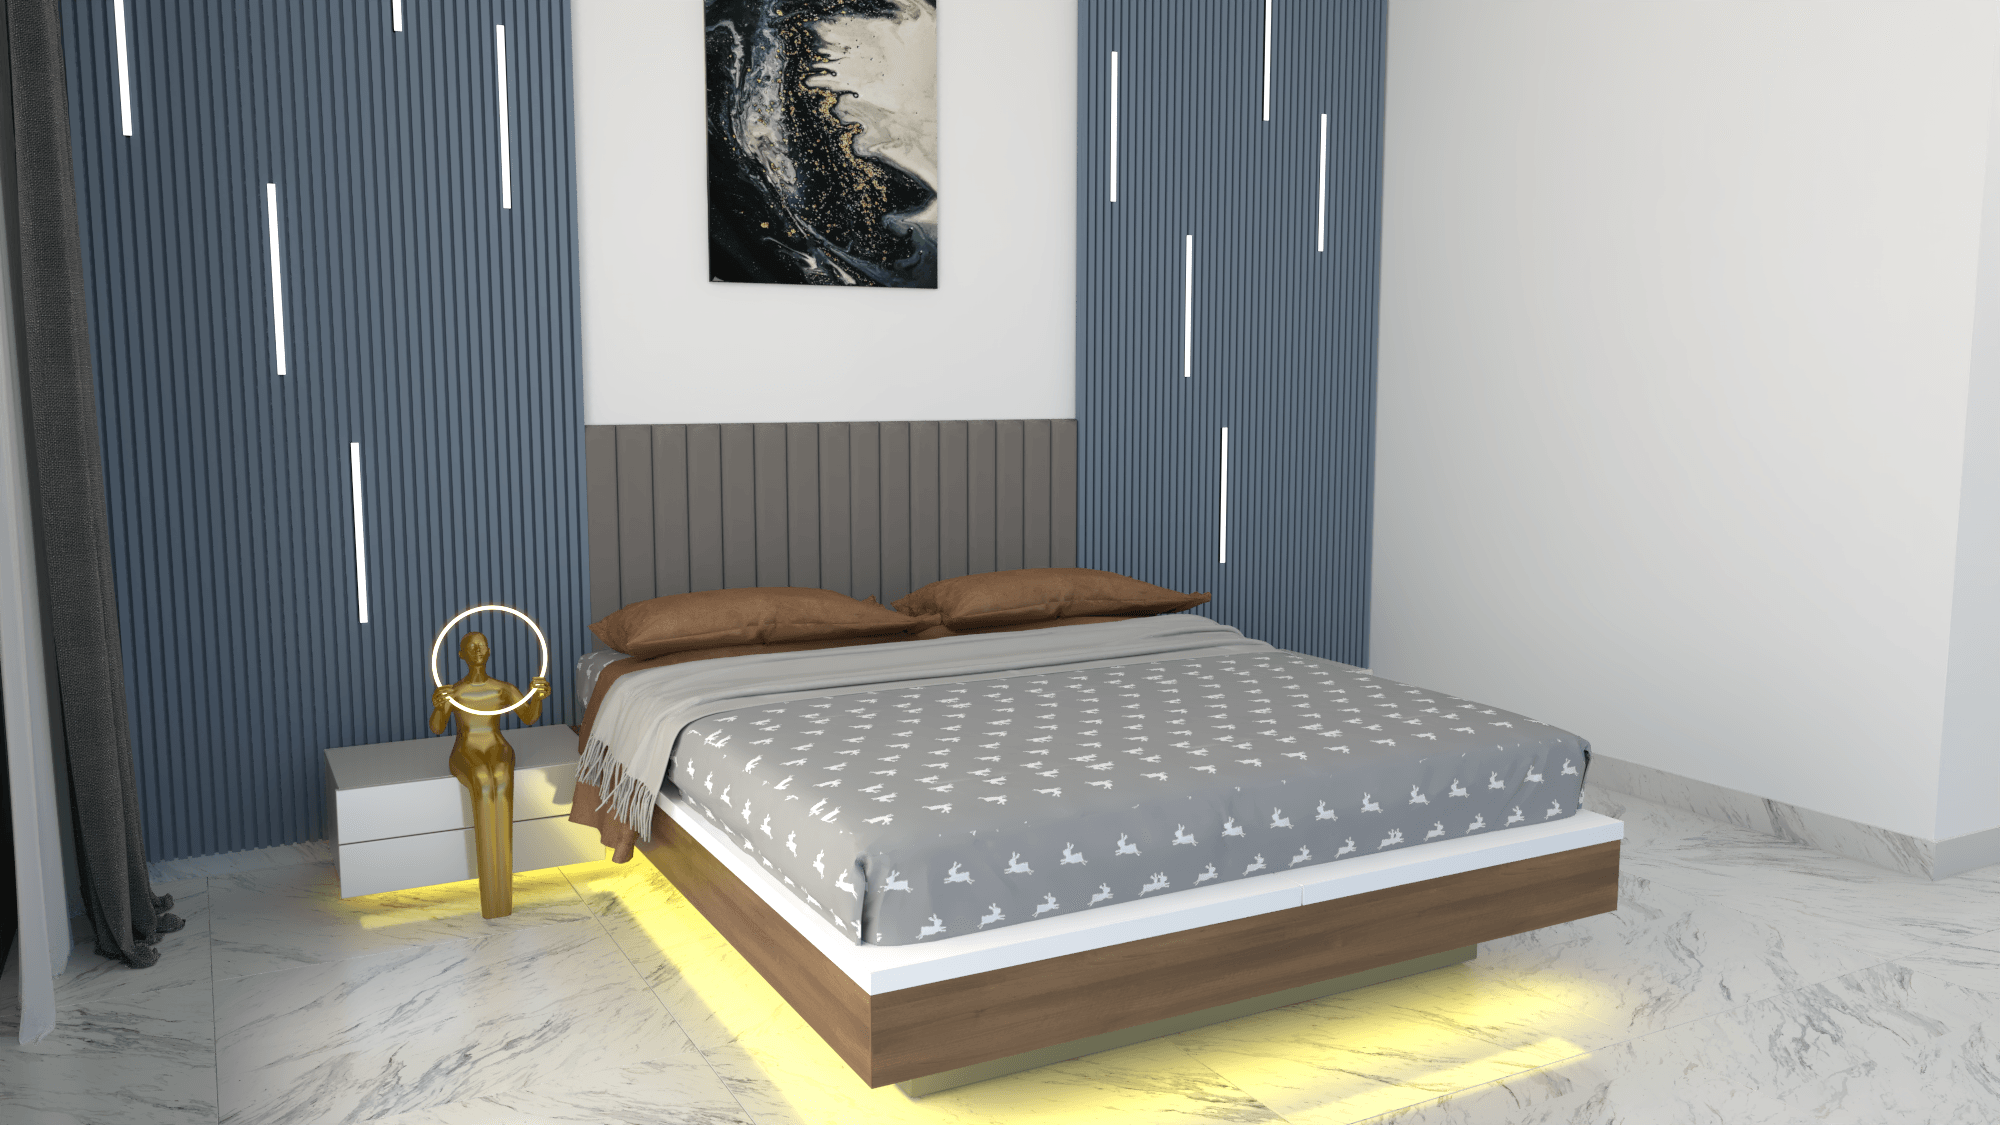 Floating Bed - InvisibleBed.com